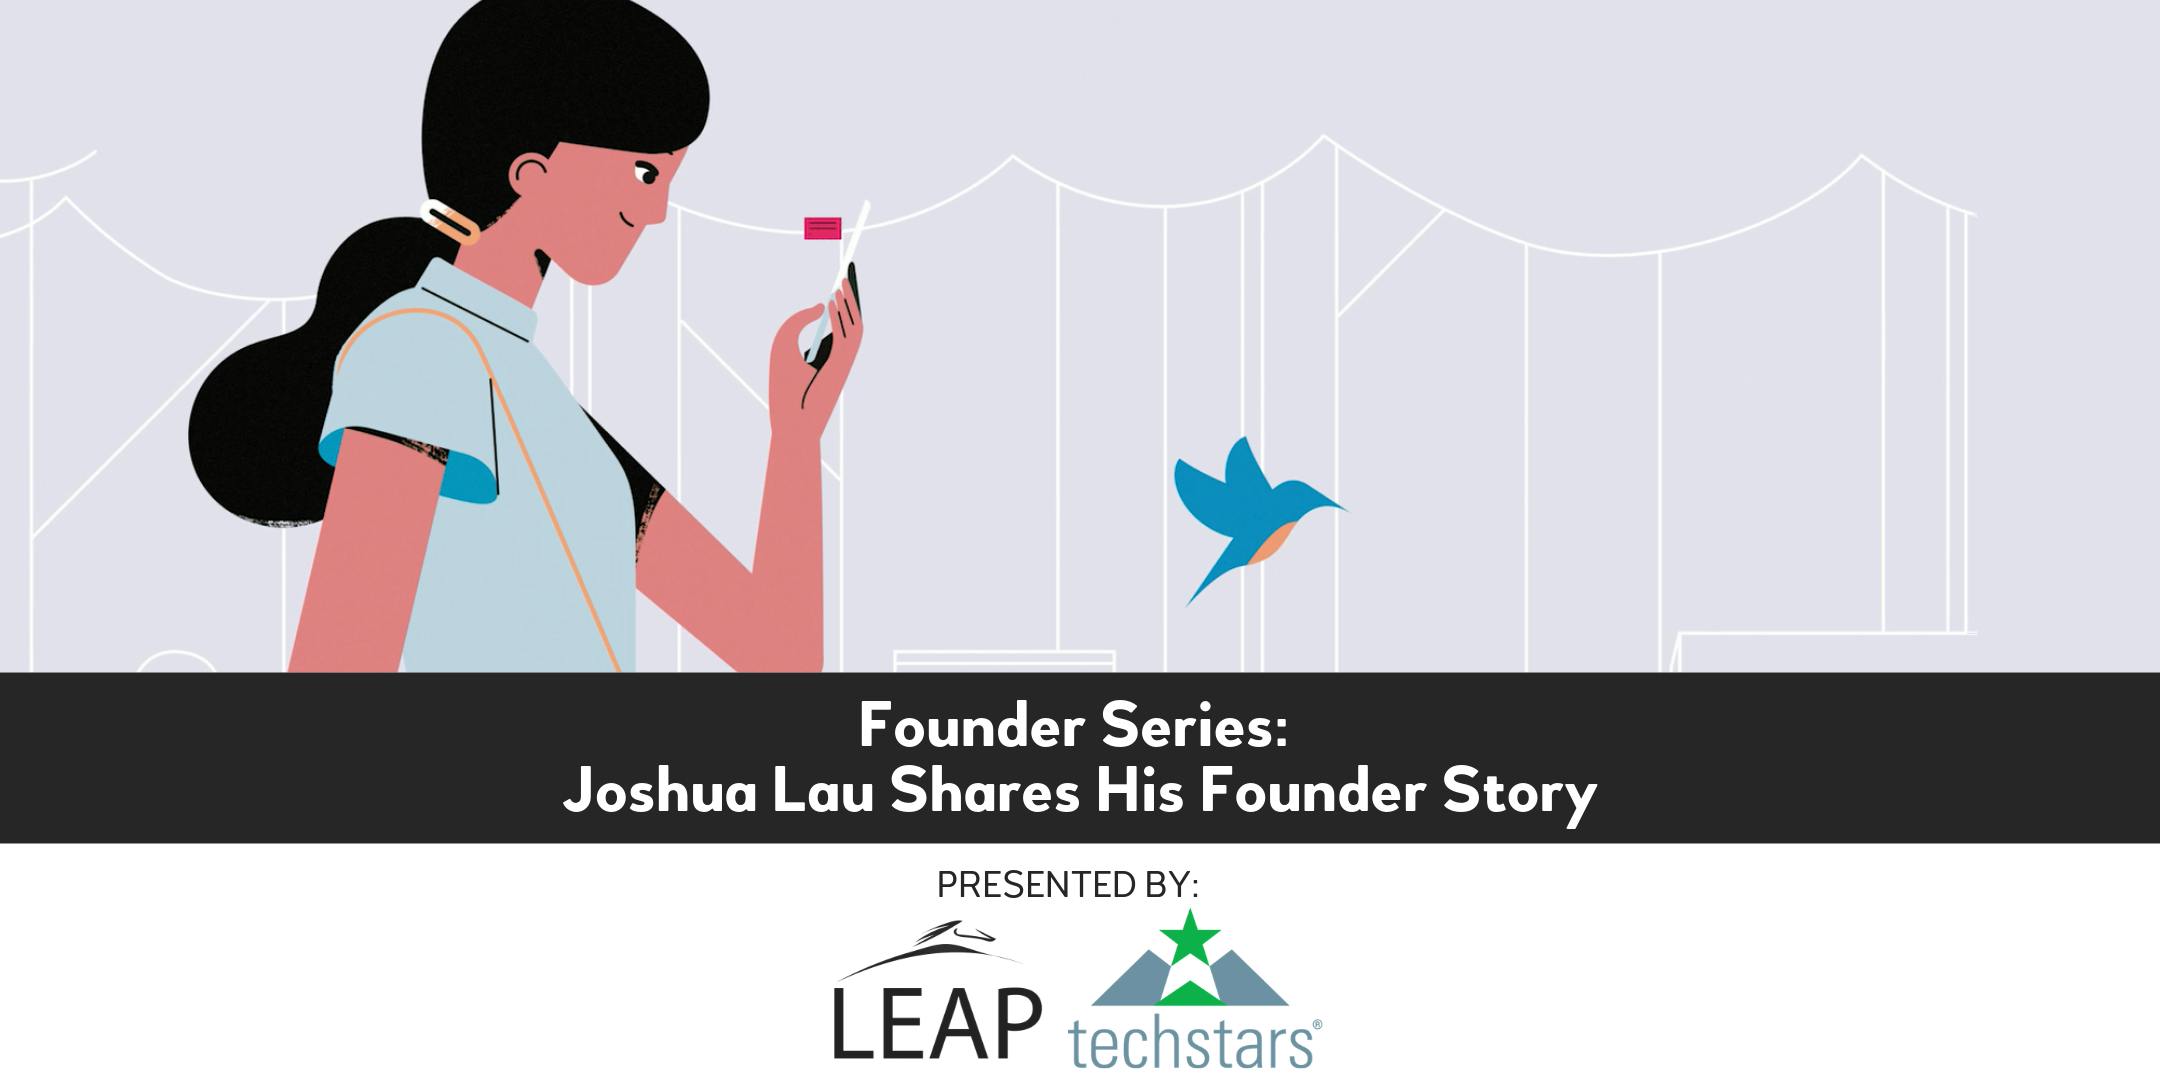 Founder Series: Joshua Lau Shares His Founder Story